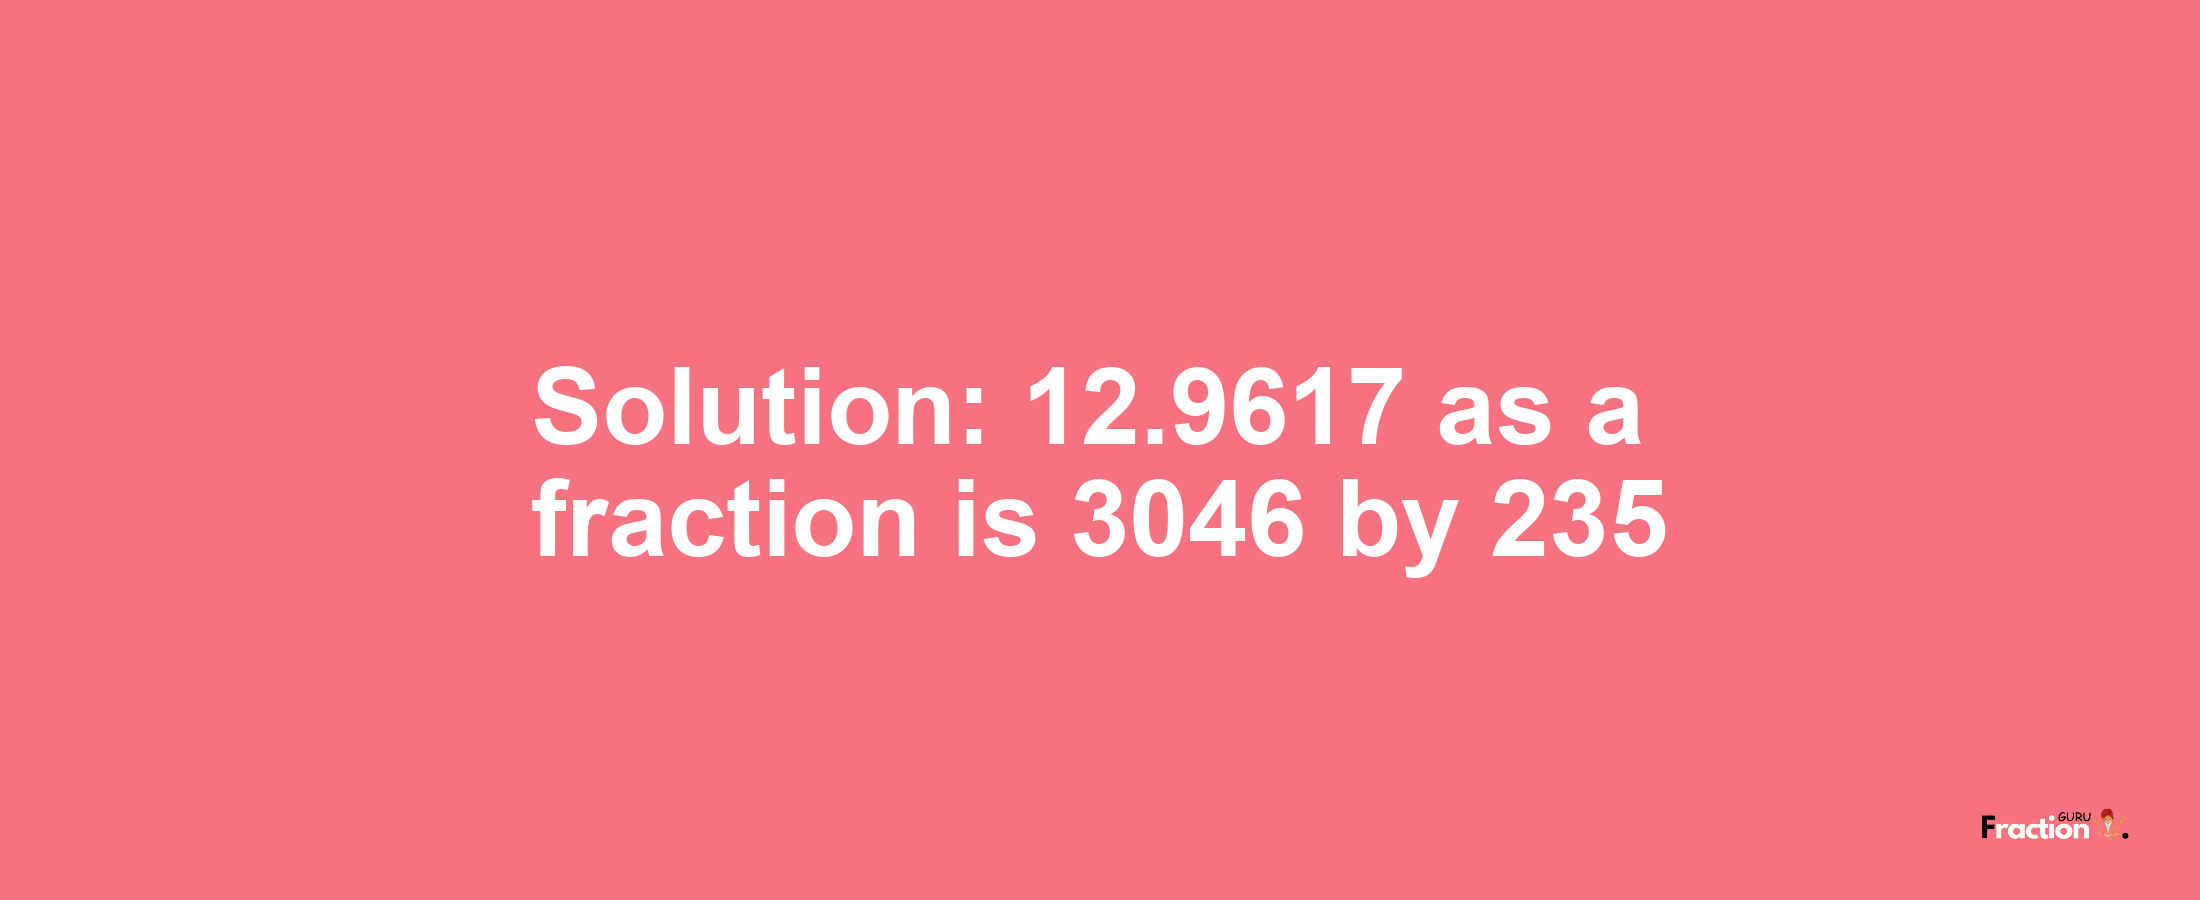 Solution:12.9617 as a fraction is 3046/235